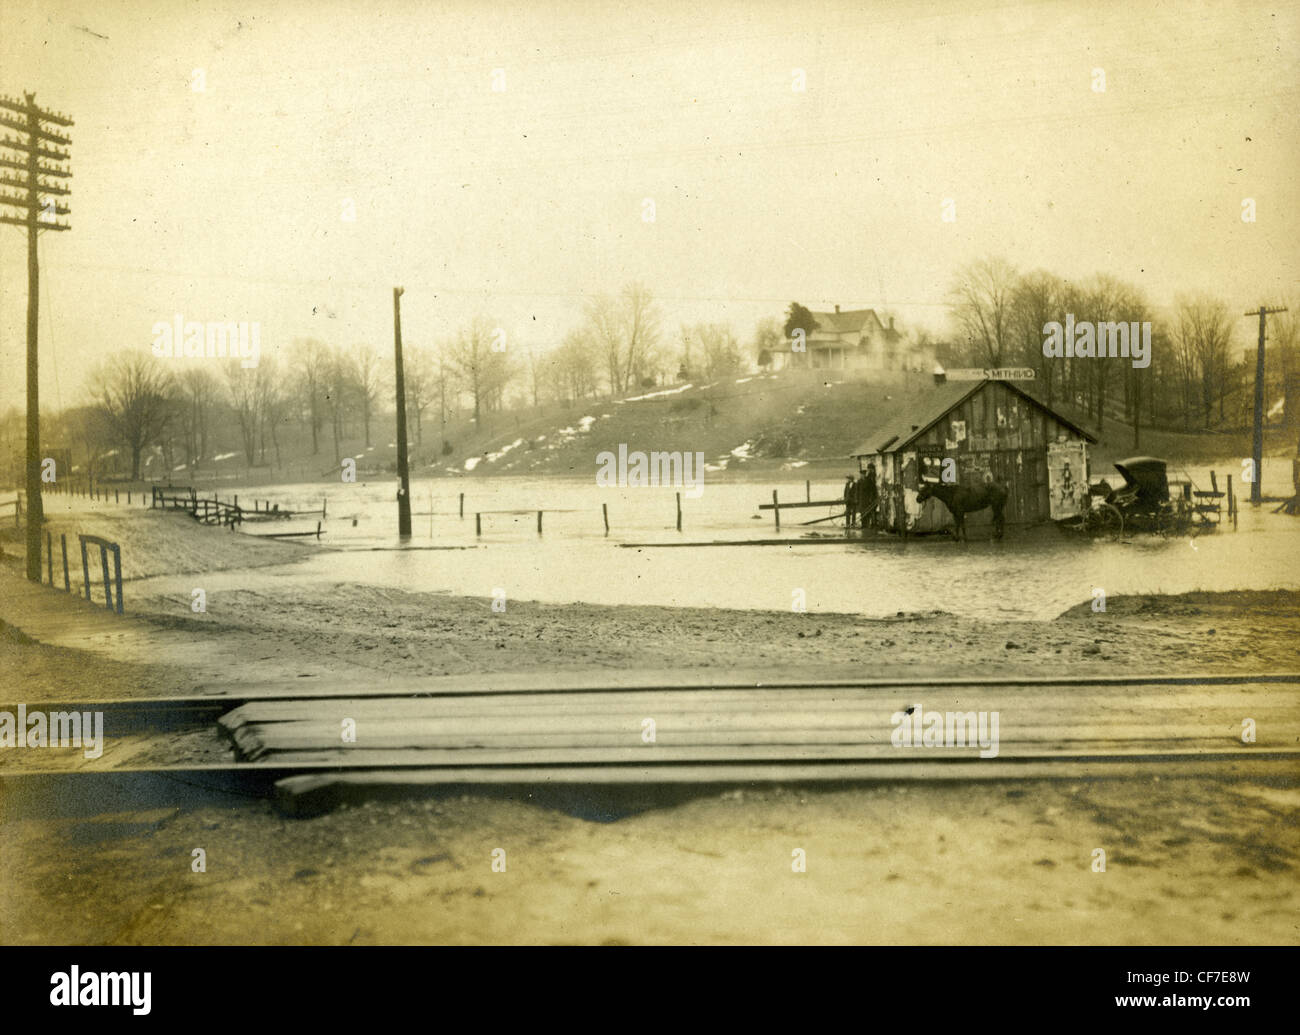 A blacksmith's stable is surrounded by water near railroad tracks in Indiana during the early 1900s. flooding black smith horses Stock Photo